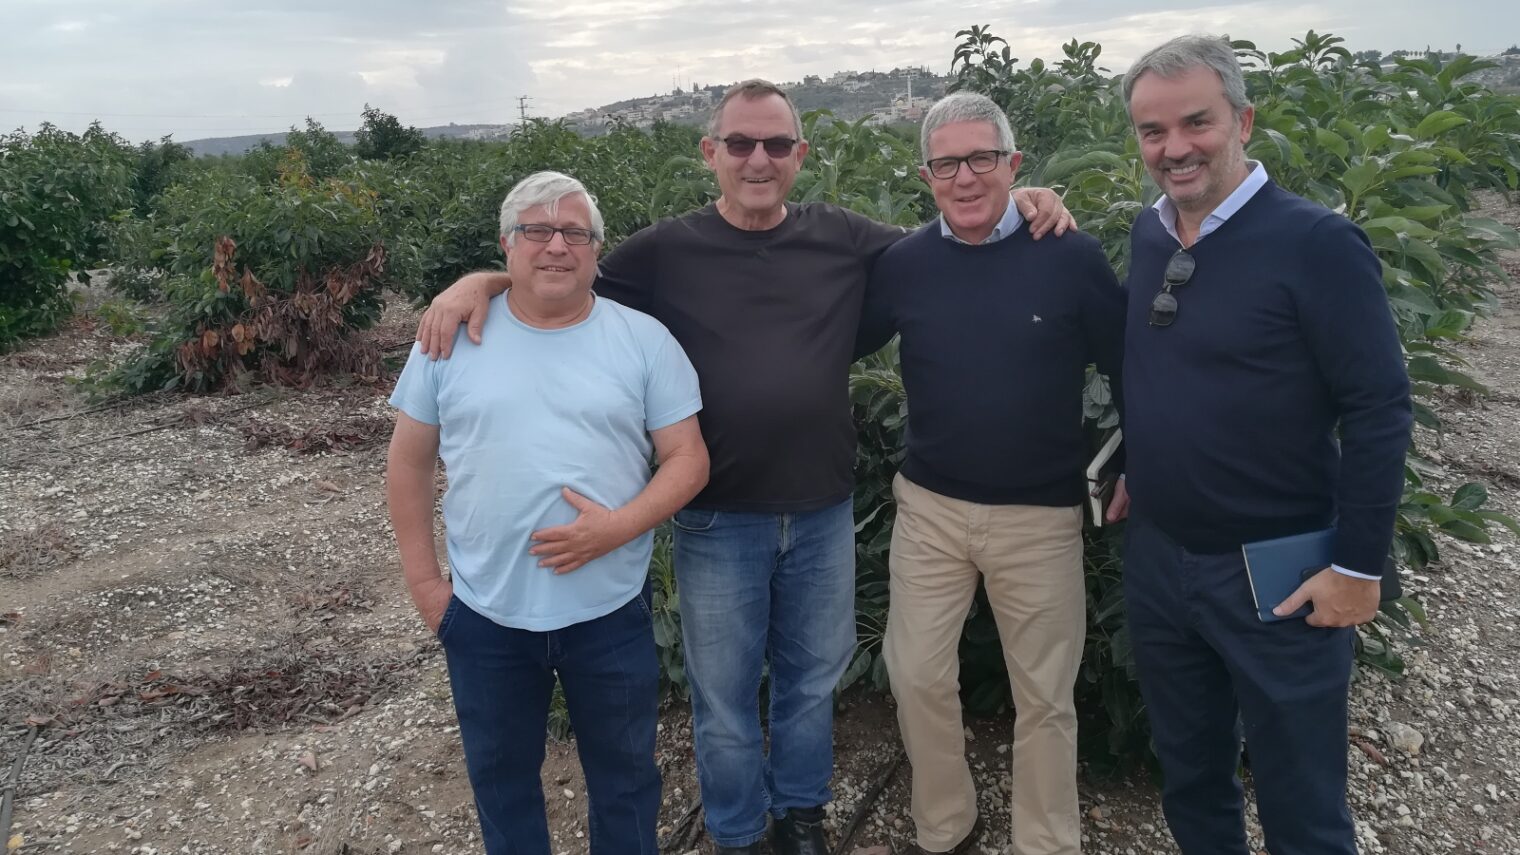 From left, Israeli avocado grower Benny Wisse and avocado scientist Leo Winer with Inspire Capital’s João Paulo Pereira and Pedro Lopes in Israel. Photo: courtesy